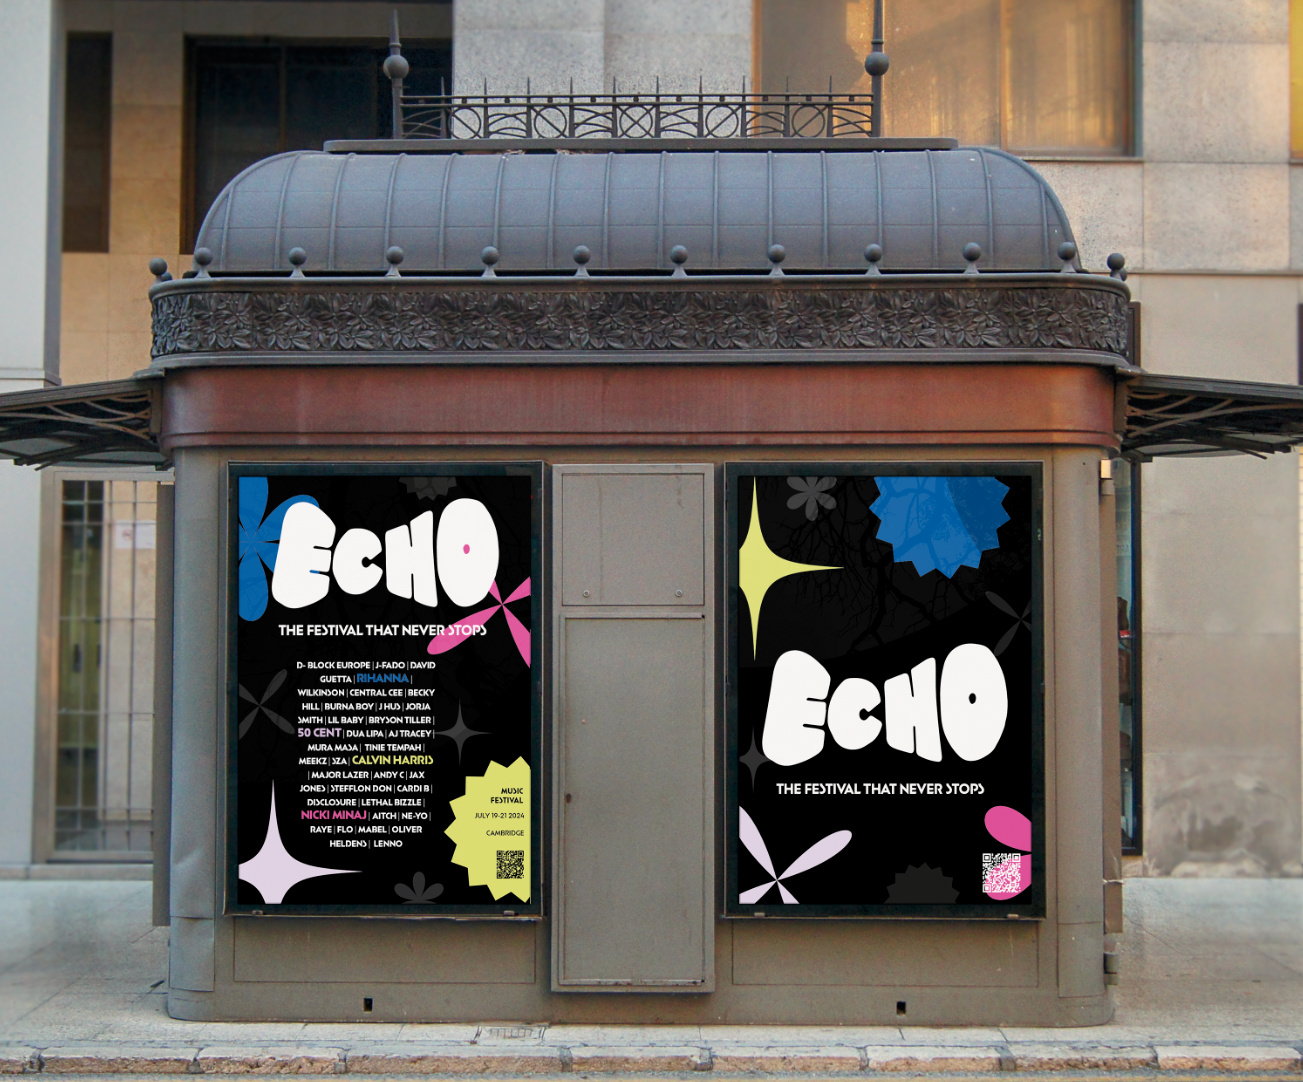 Street kiosk with two Echo posters on it